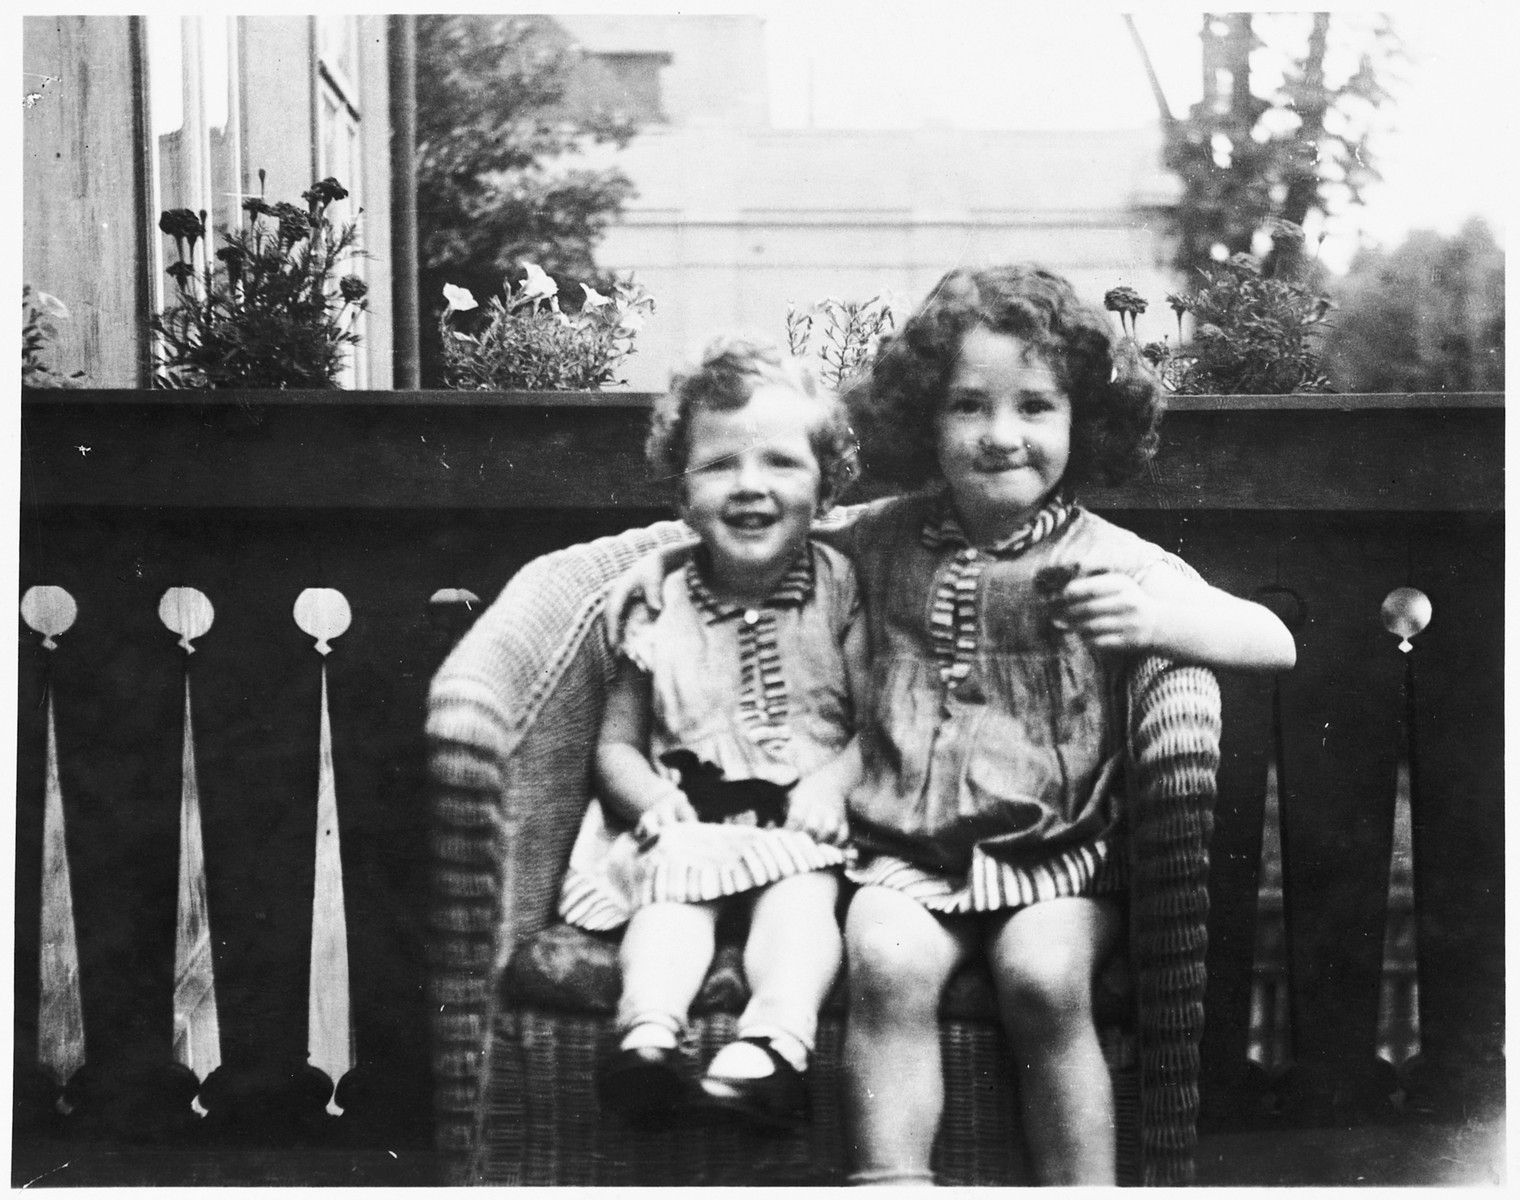 Shulamit and Gitta Posner share a wicker chair on the porch of their home in Kiel, Germany.